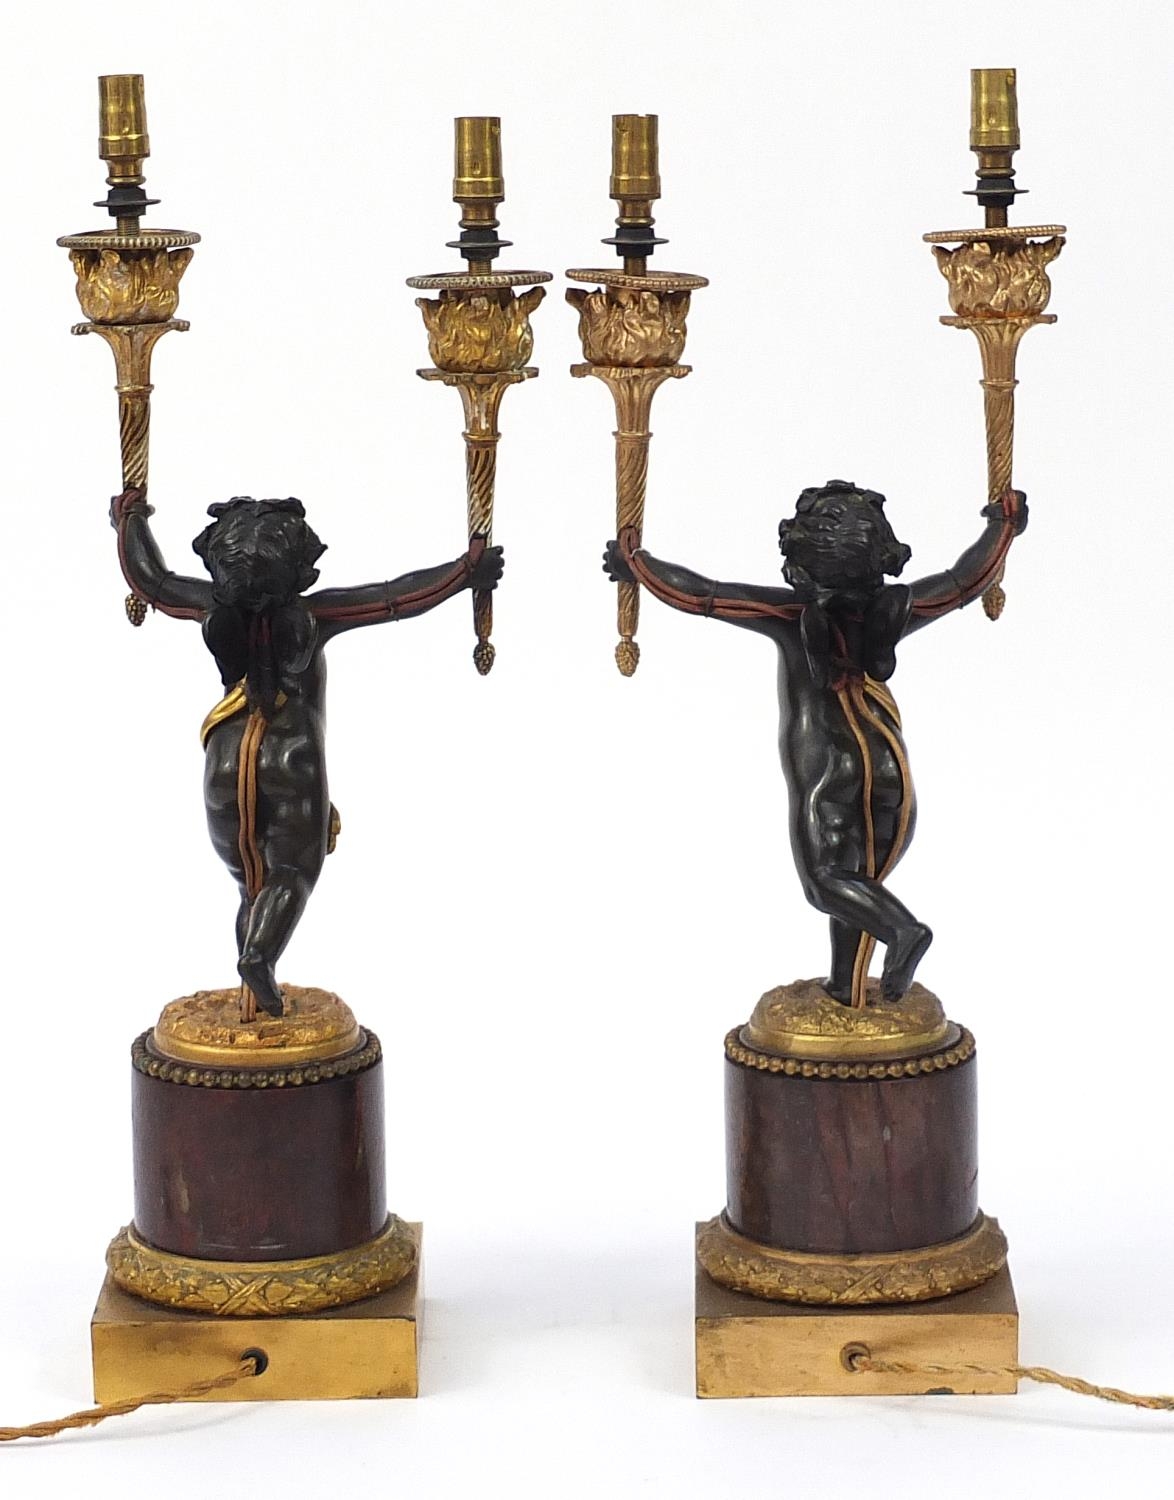 Pair of 19th century ormolu and marble Putti design two branch candelabras converted to electric - Image 3 of 7